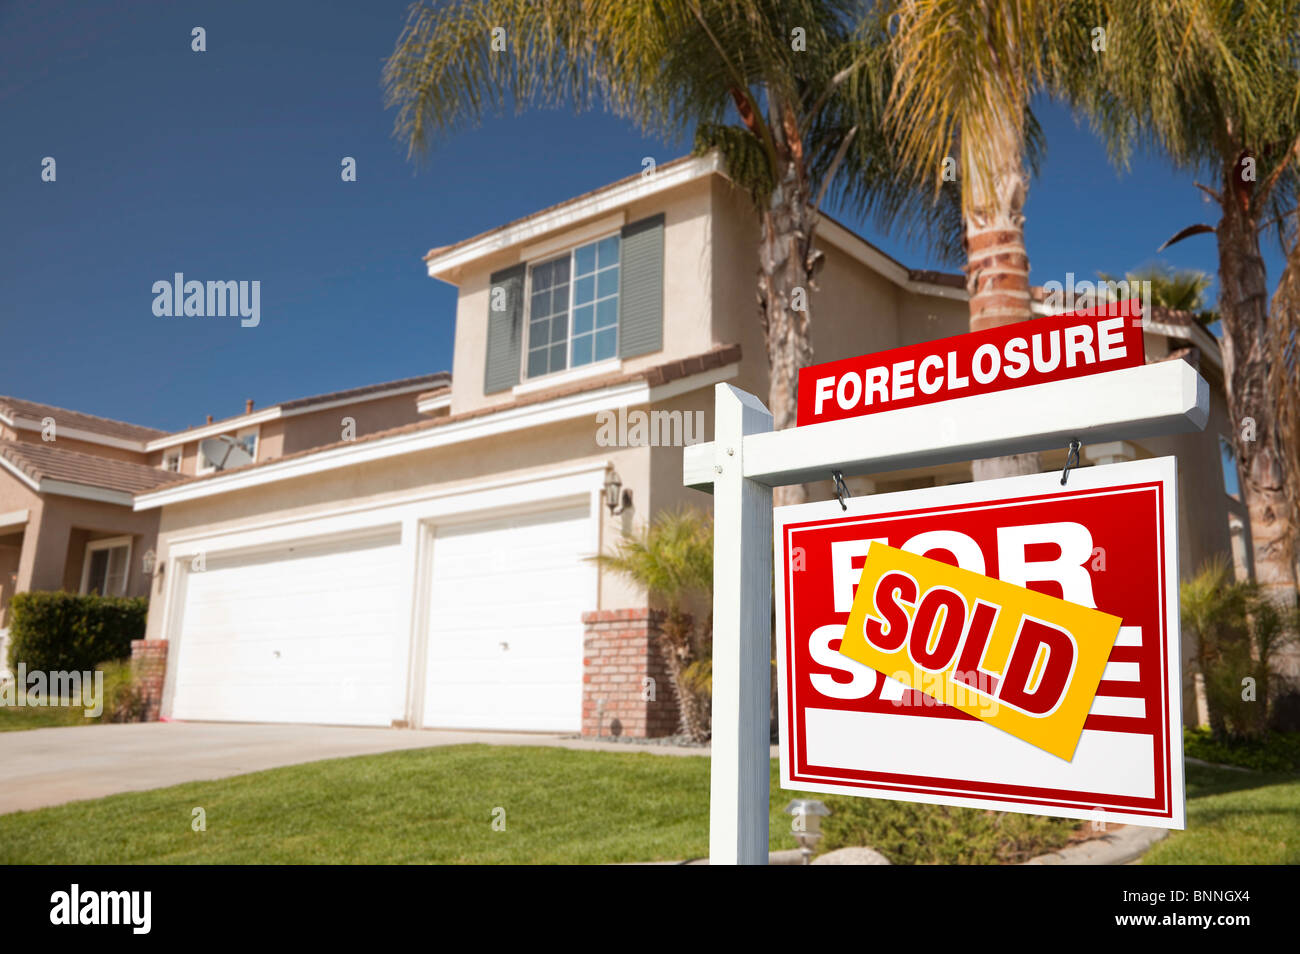 Red Foreclosure For Sale Real Estate Sign in Front of House. Stock Photo